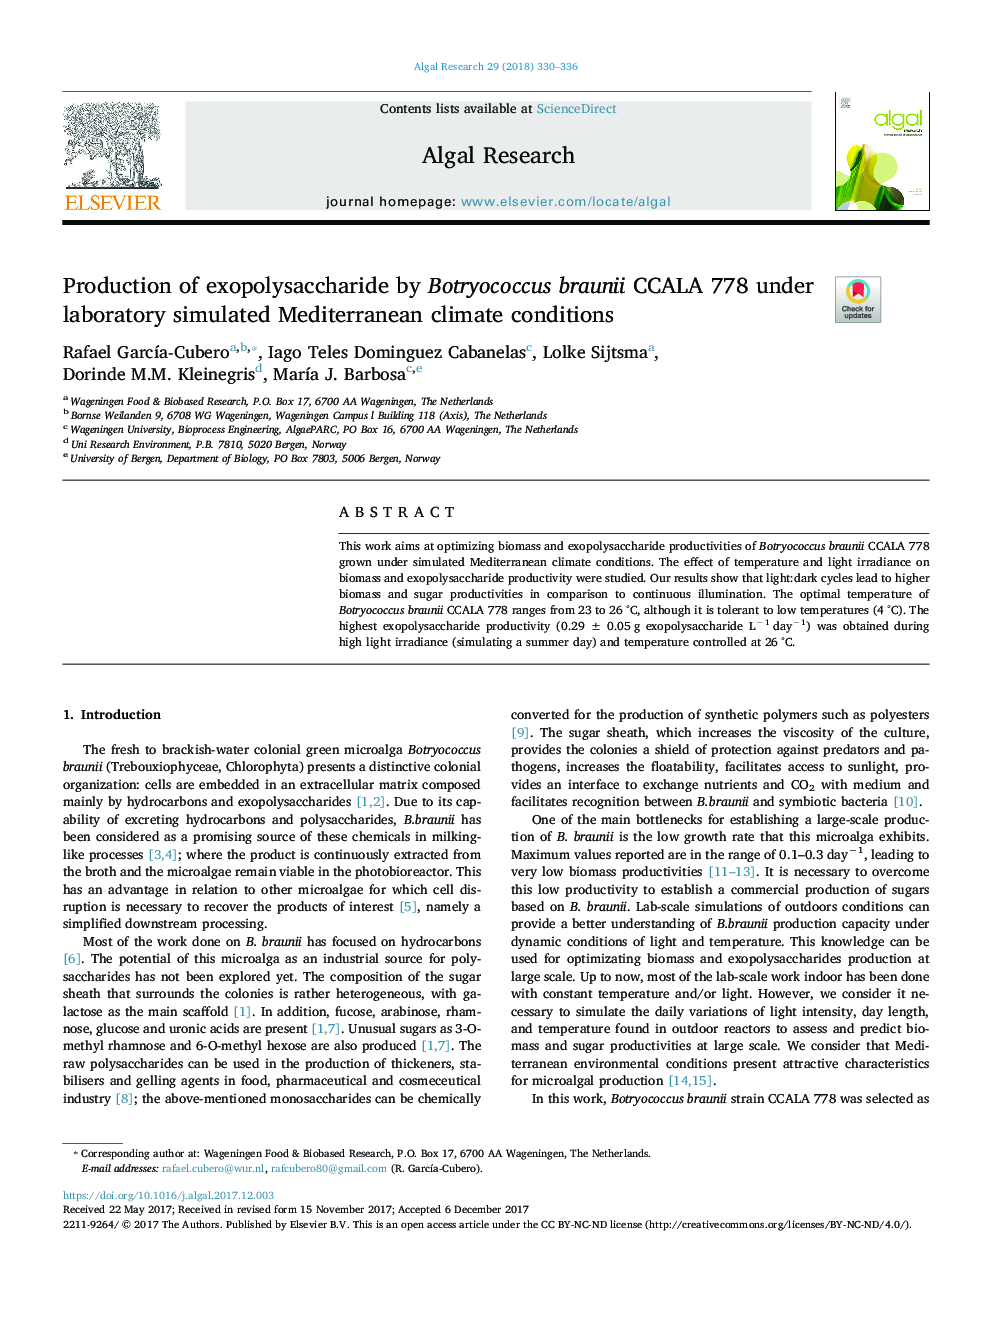 Production of exopolysaccharide by Botryococcus braunii CCALA 778 under laboratory simulated Mediterranean climate conditions